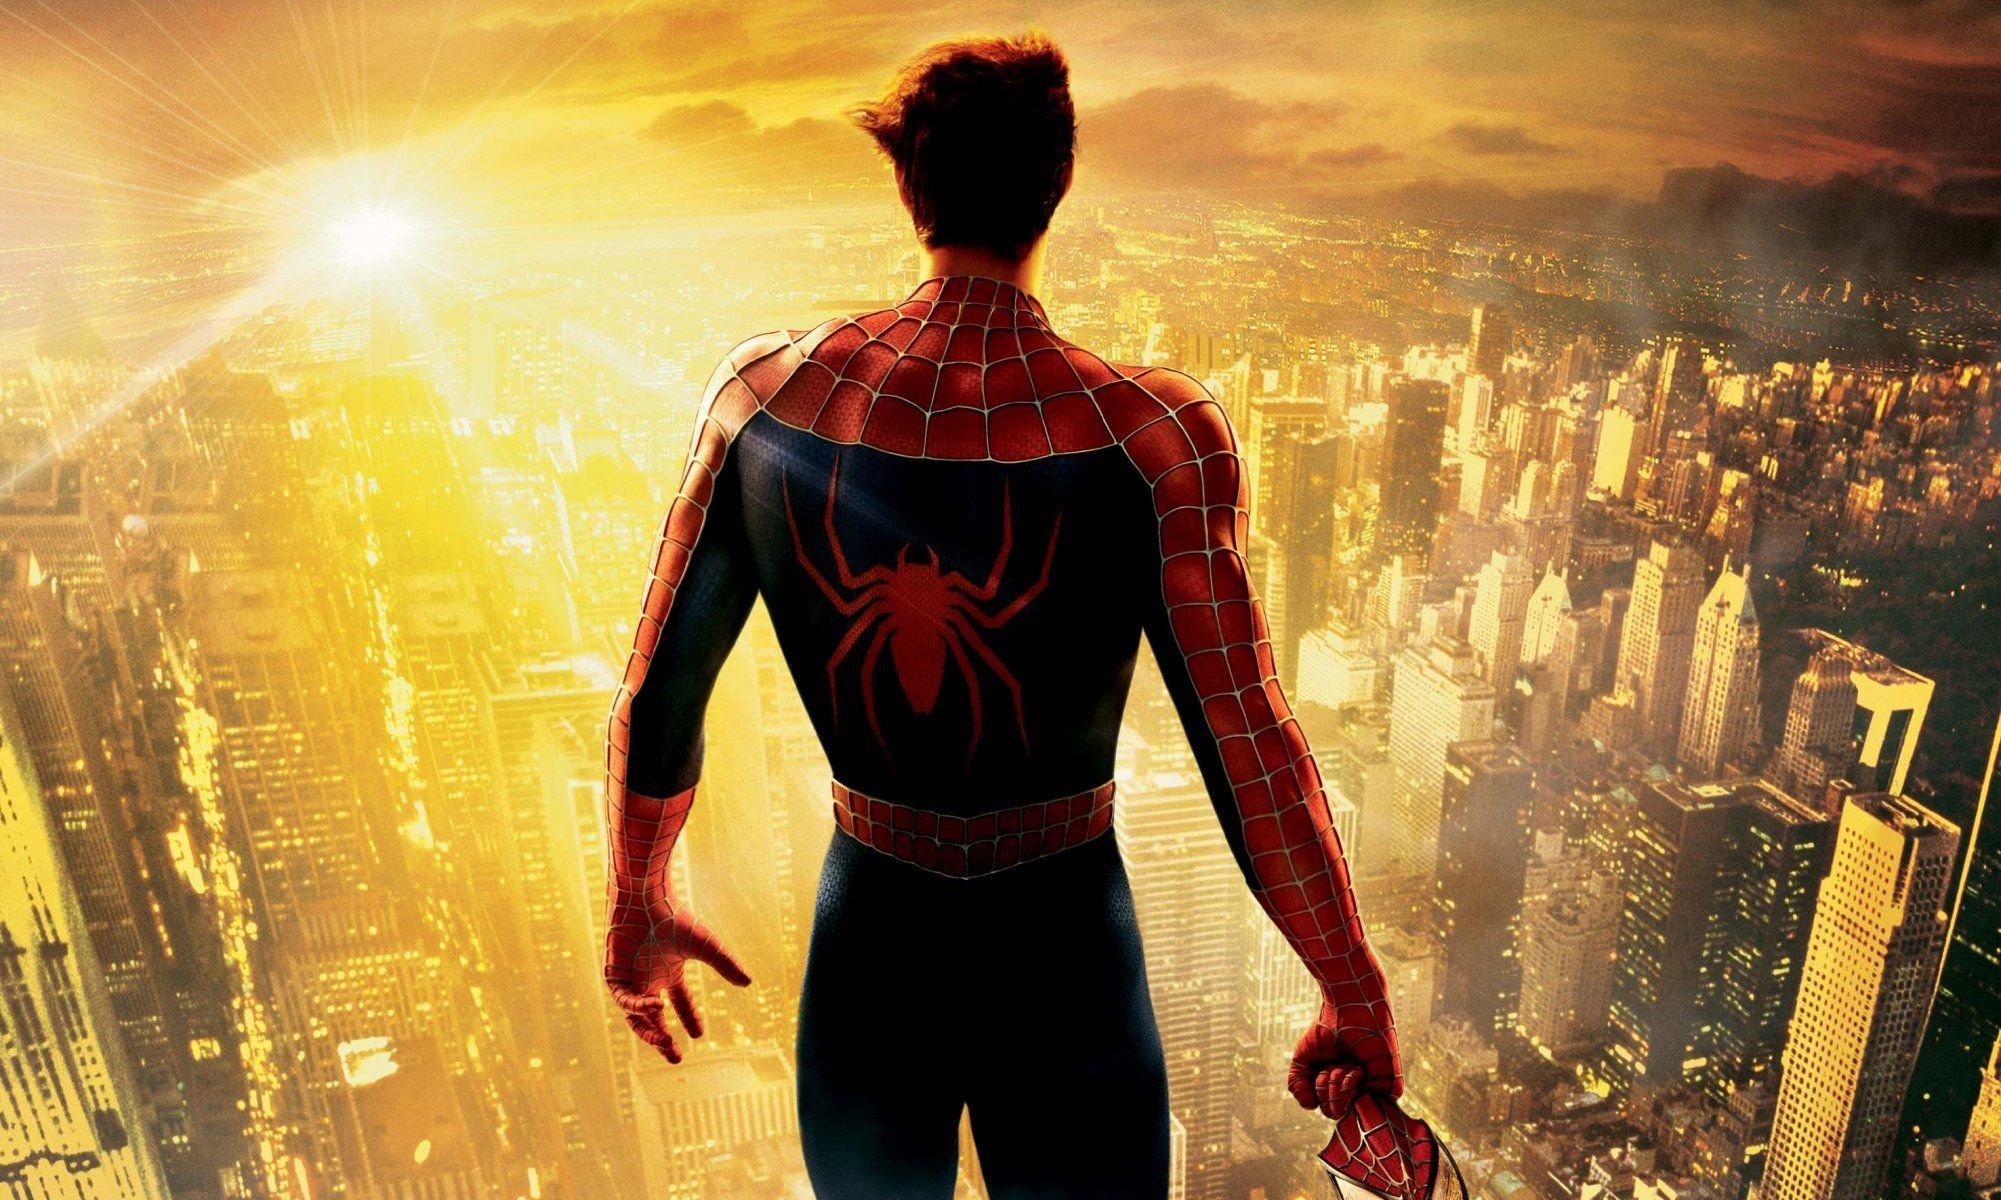 Tobey Maguire Spiderman Wallpapers posted by Sarah Sellers